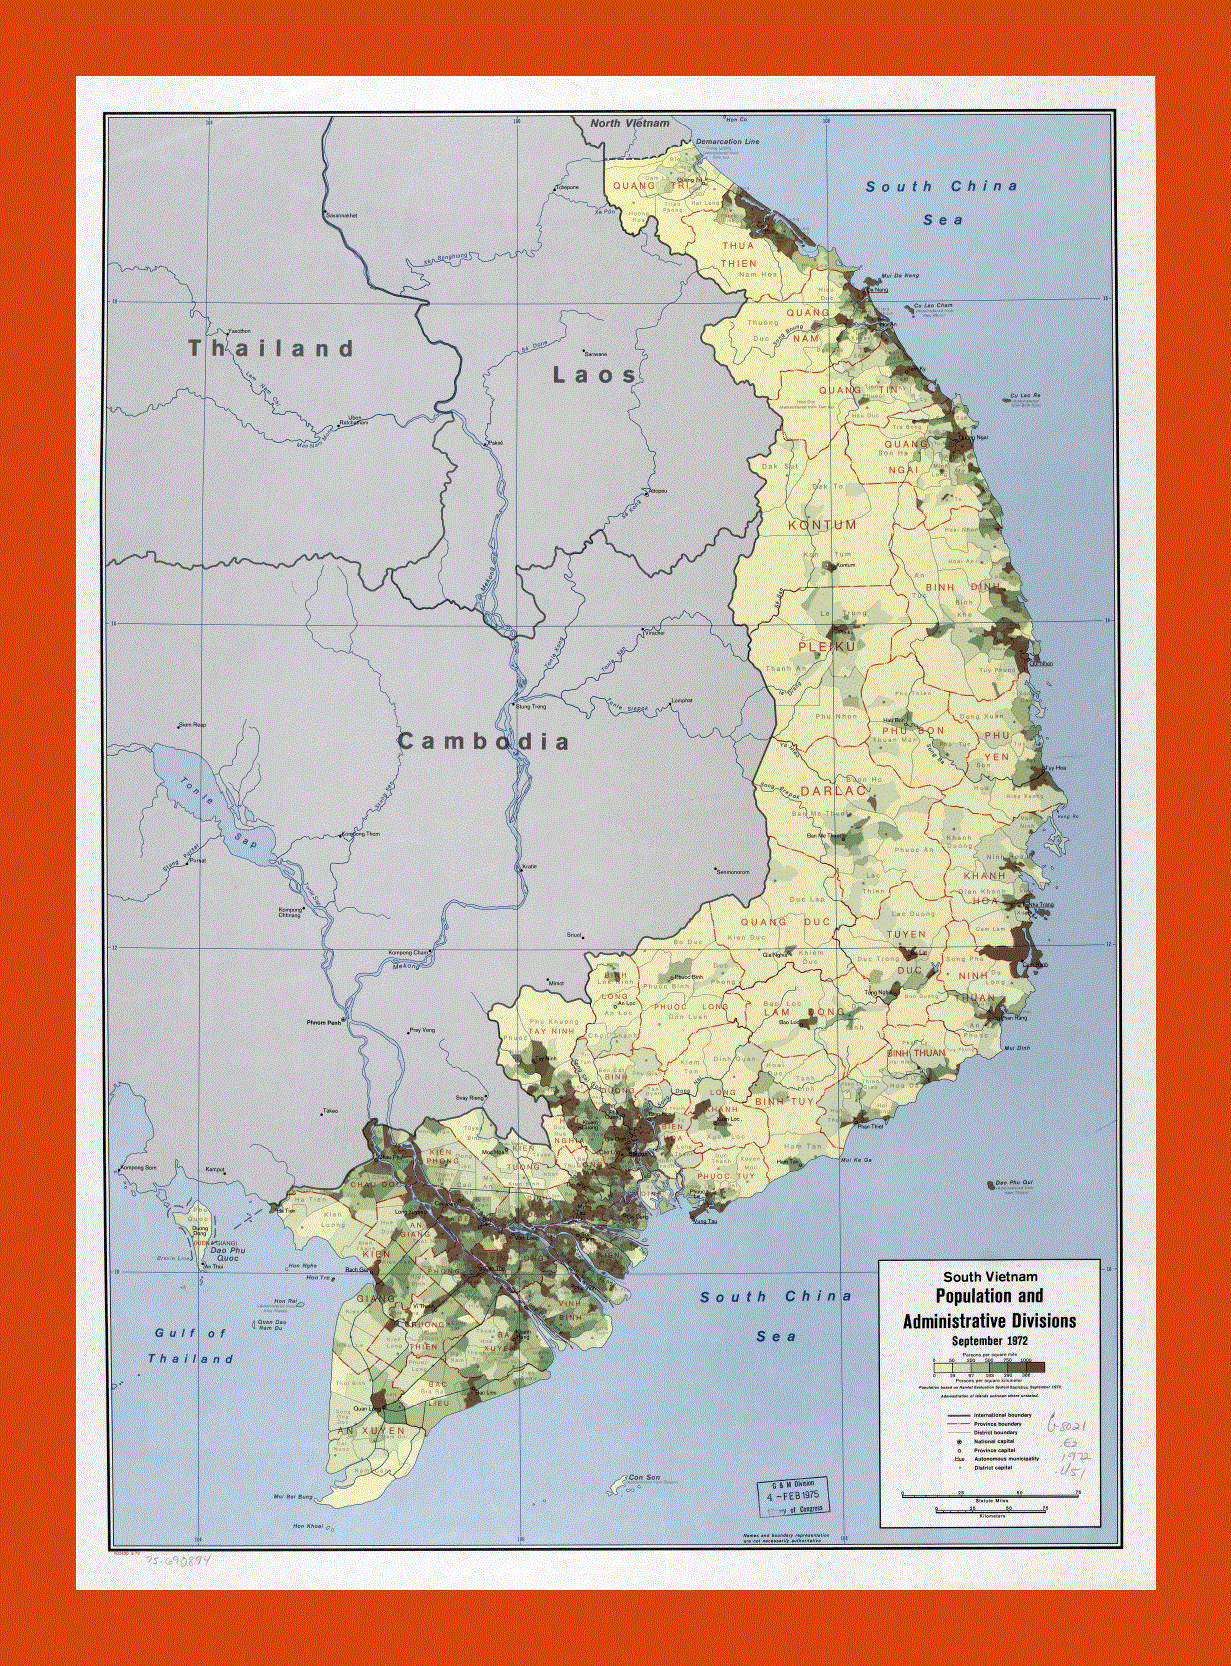 South Vietnam population and administrative divisions map - 1973